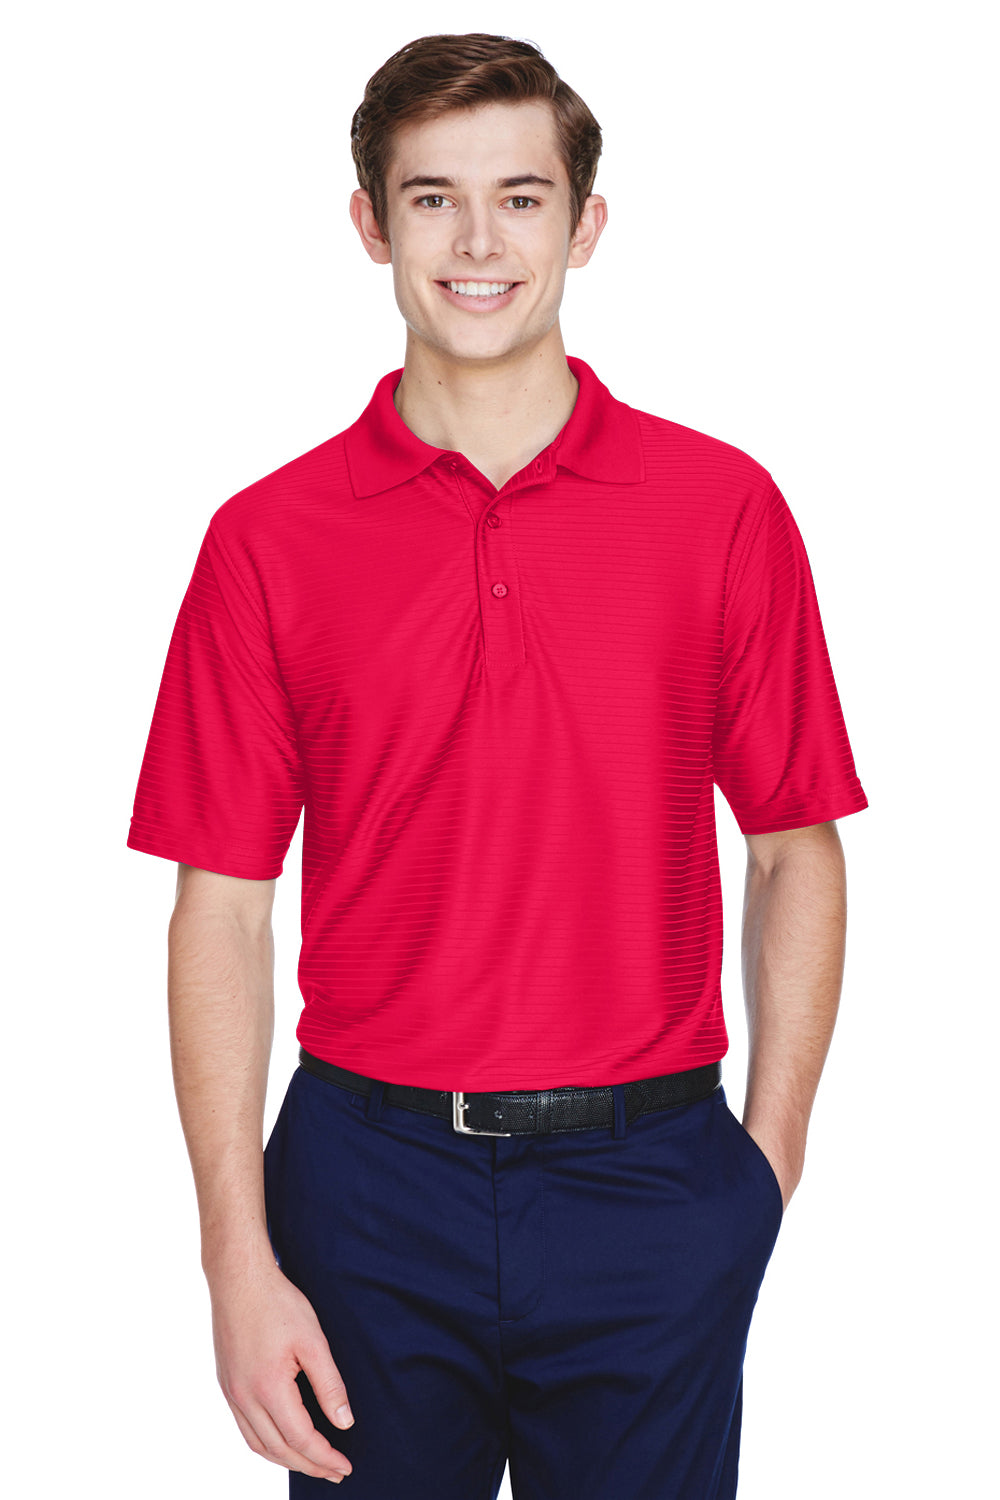 UltraClub 8413 Mens Cool & Dry Elite Performance Moisture Wicking Short Sleeve Polo Shirt Red Front